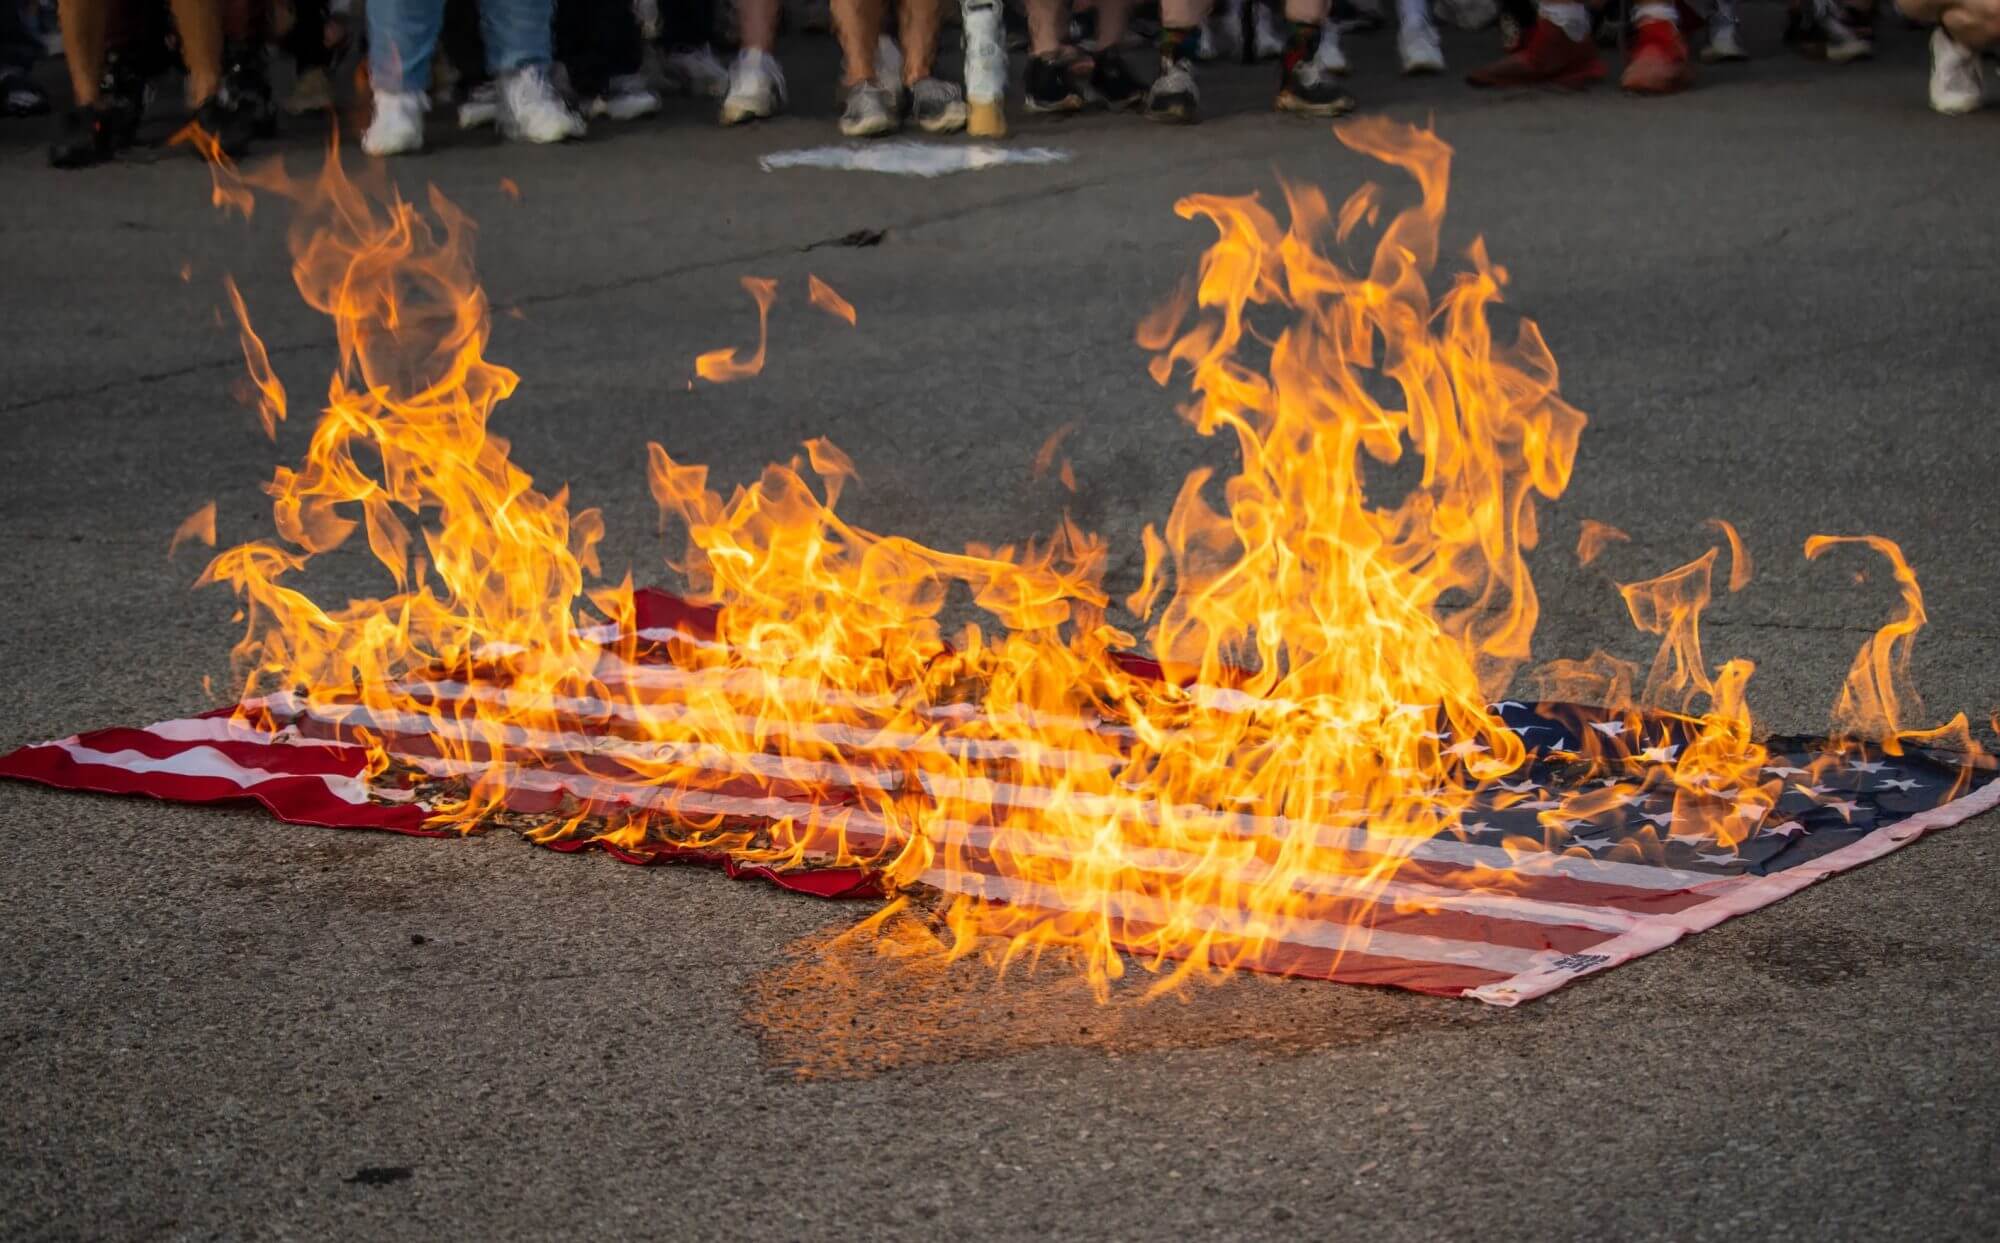 An American flag burning in the street in the middle of a crowd.